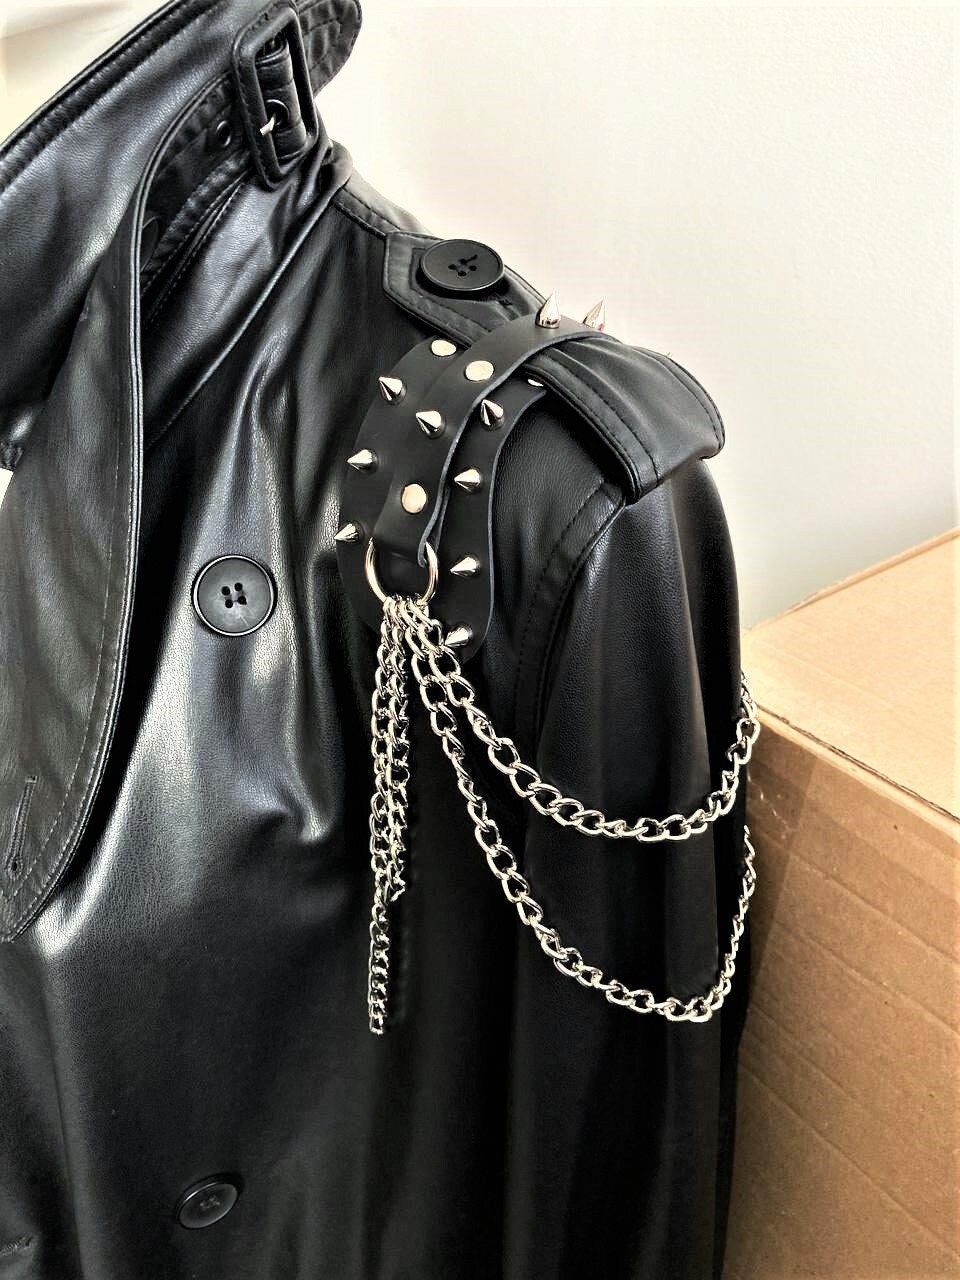 Top 15 Spiked Leather Jacket Outfit Ideas for Women